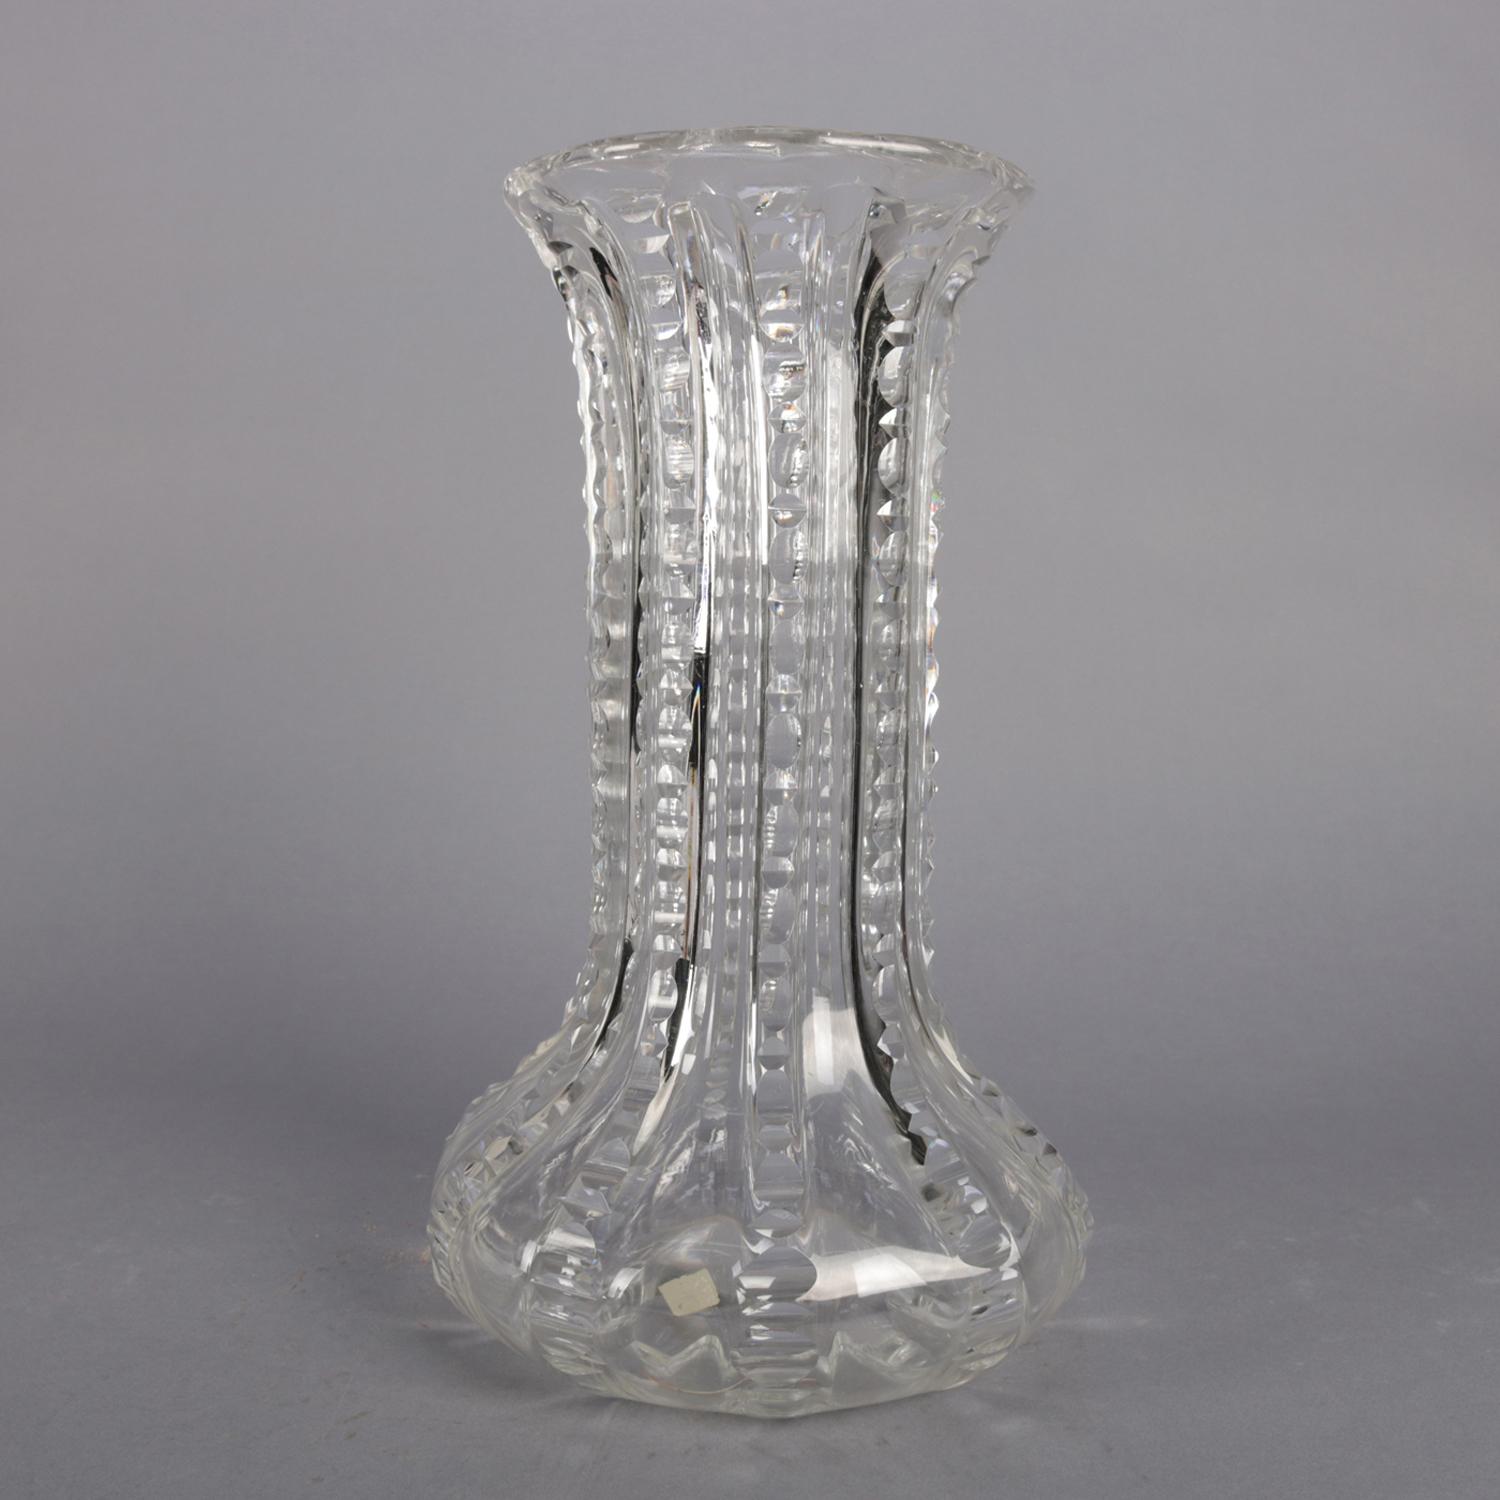 Oversized antique Hawkes School glass vase features ribbed design with bulbous base, narrow neck and flared mouth, circa 1900.

***DELIVERY NOTICE – Due to COVID-19 we are employing NO-CONTACT PRACTICES in the transfer of purchased items. 